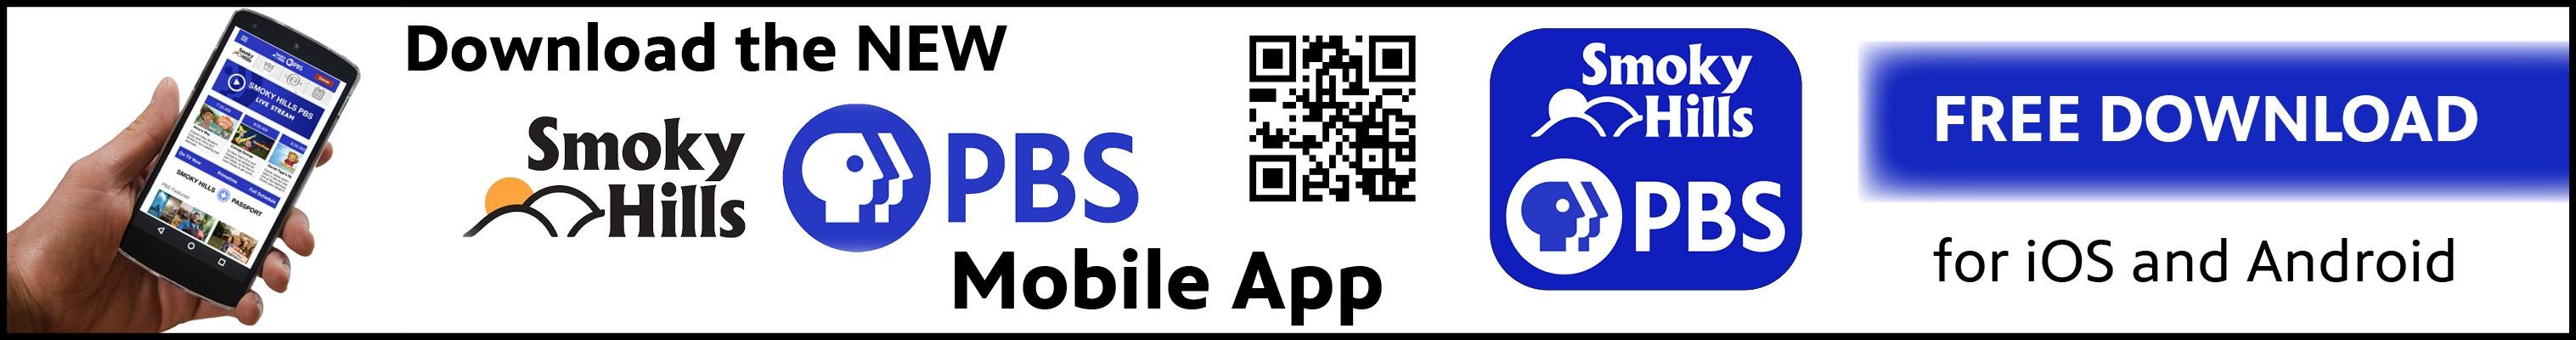 Download the Smoky Hills PBS app